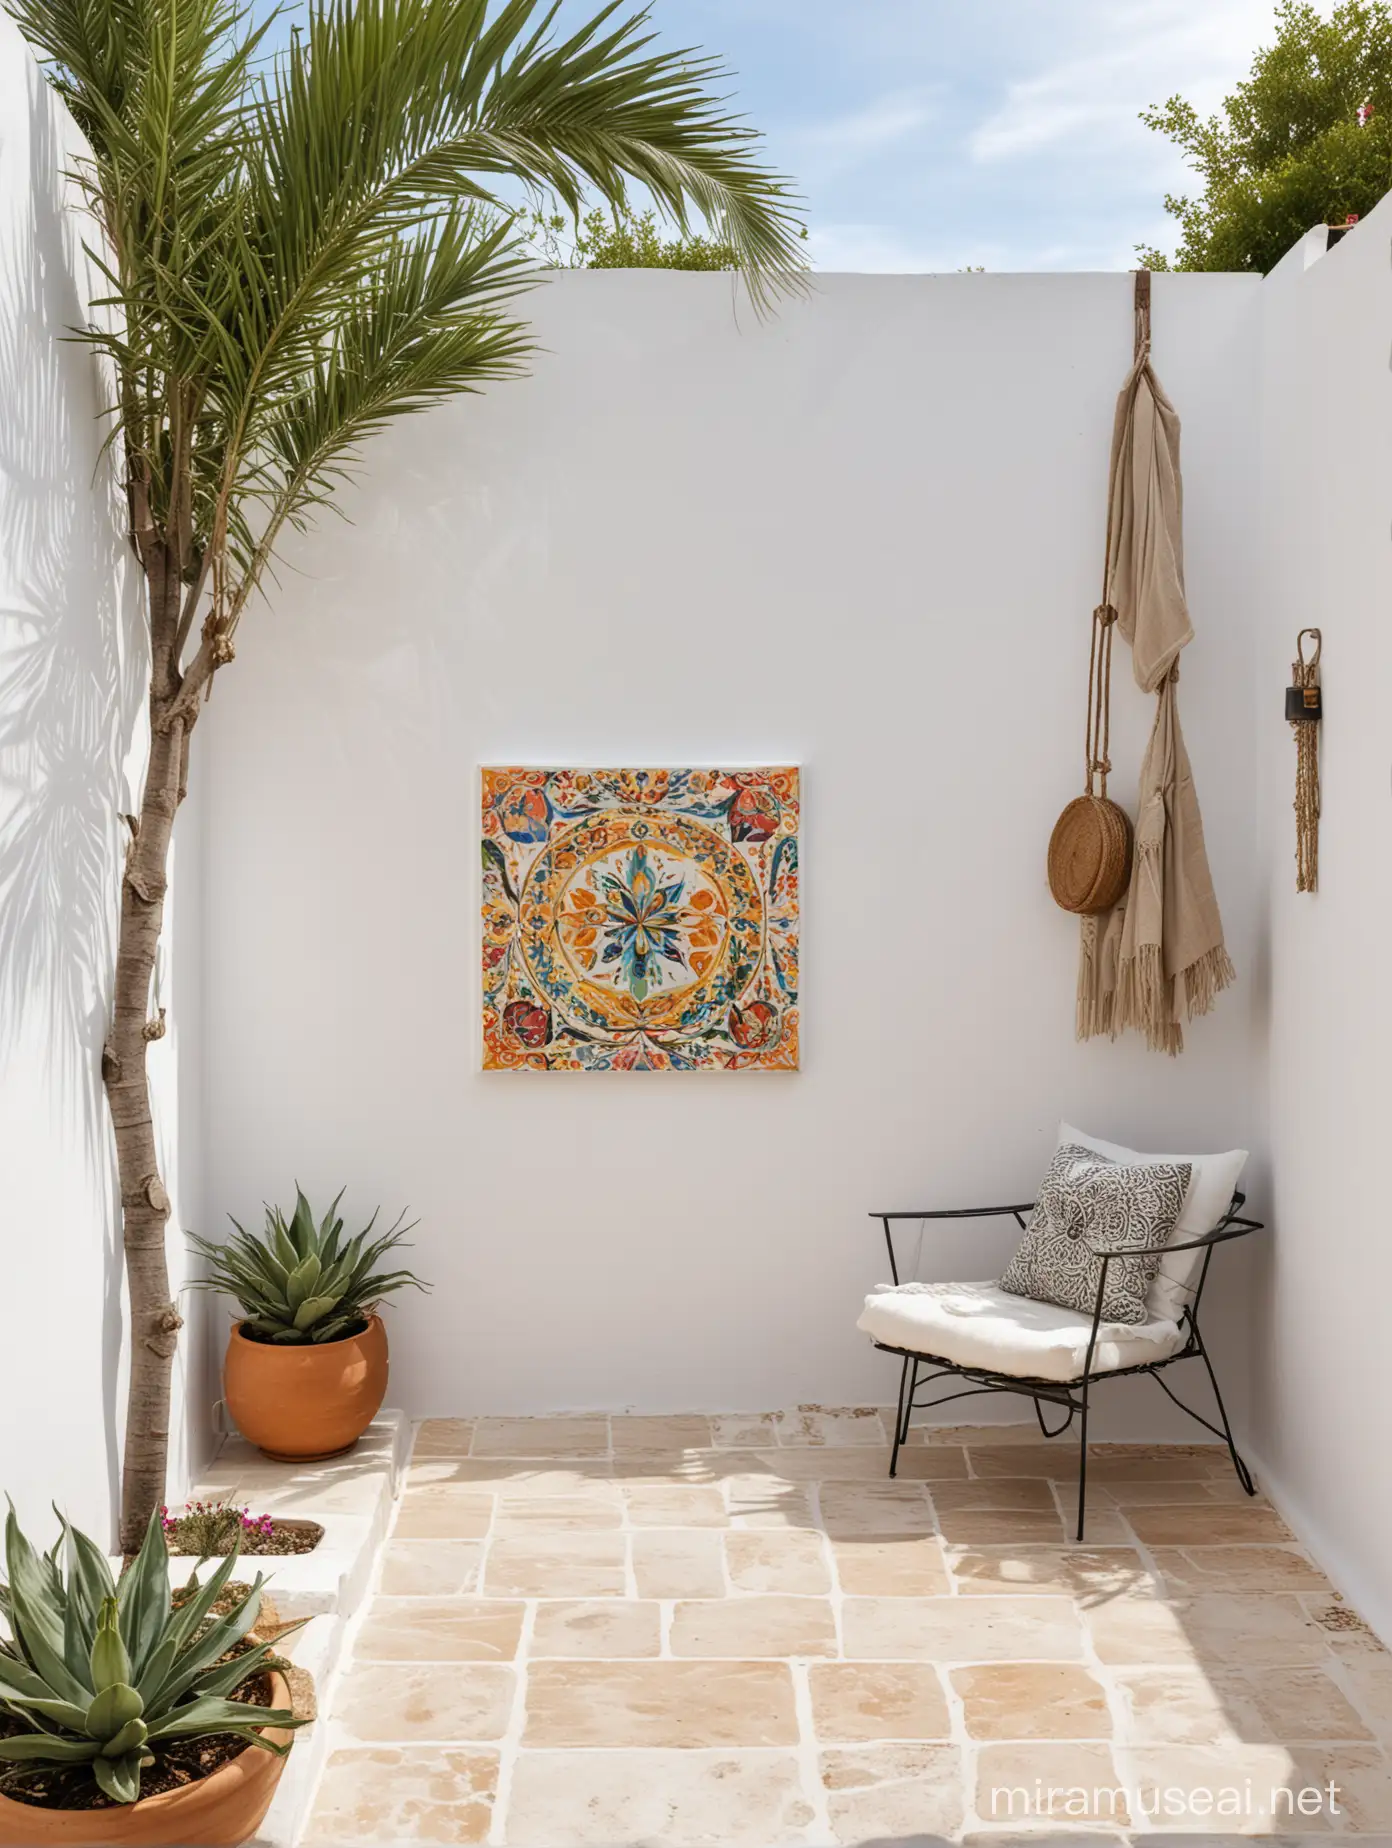 Ibiza Style Patio Small Square Painting Adorns White Wall